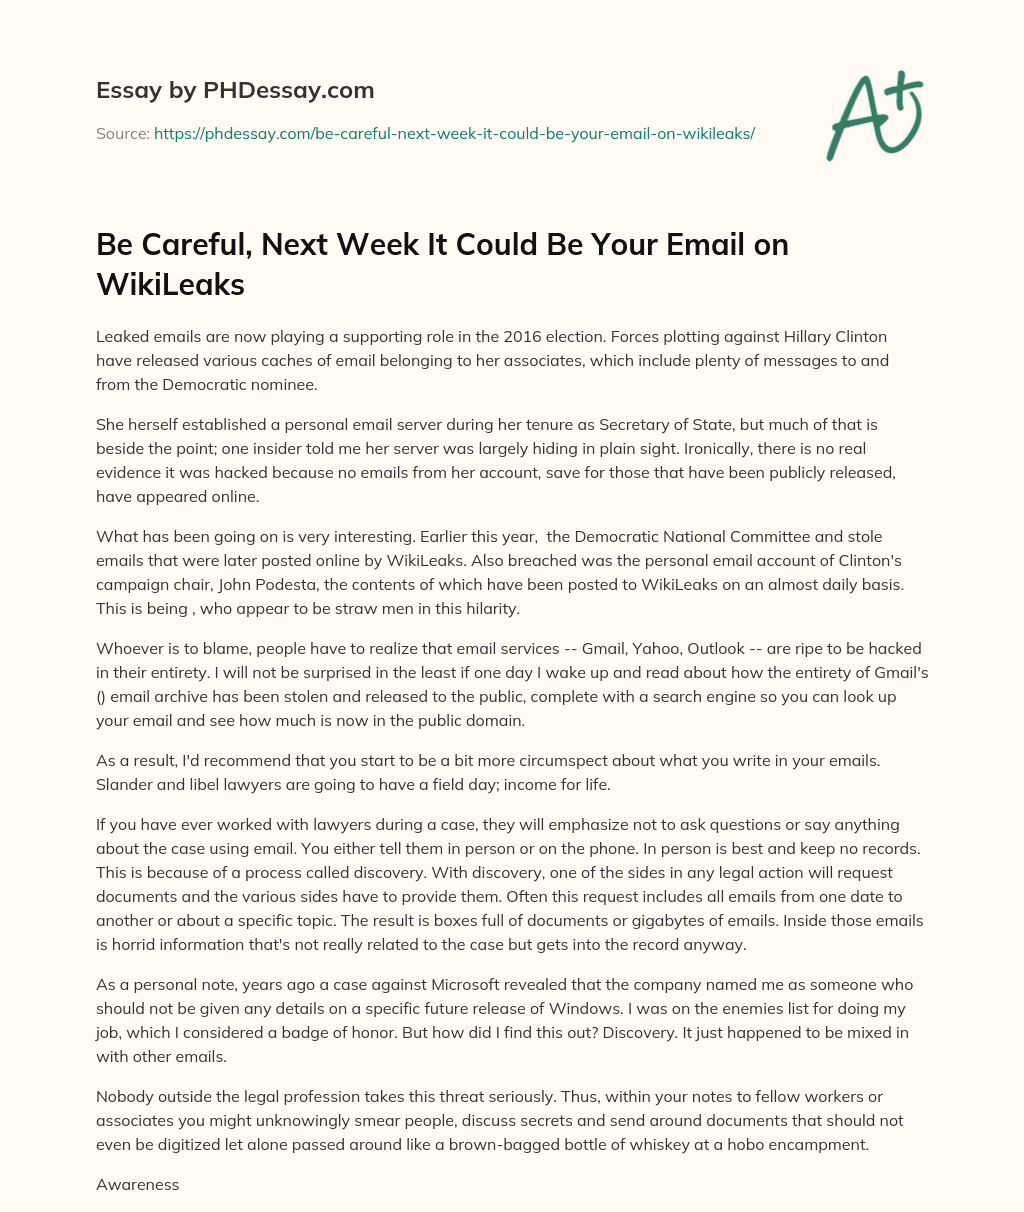 Be Careful, Next Week It Could Be Your Email on WikiLeaks essay